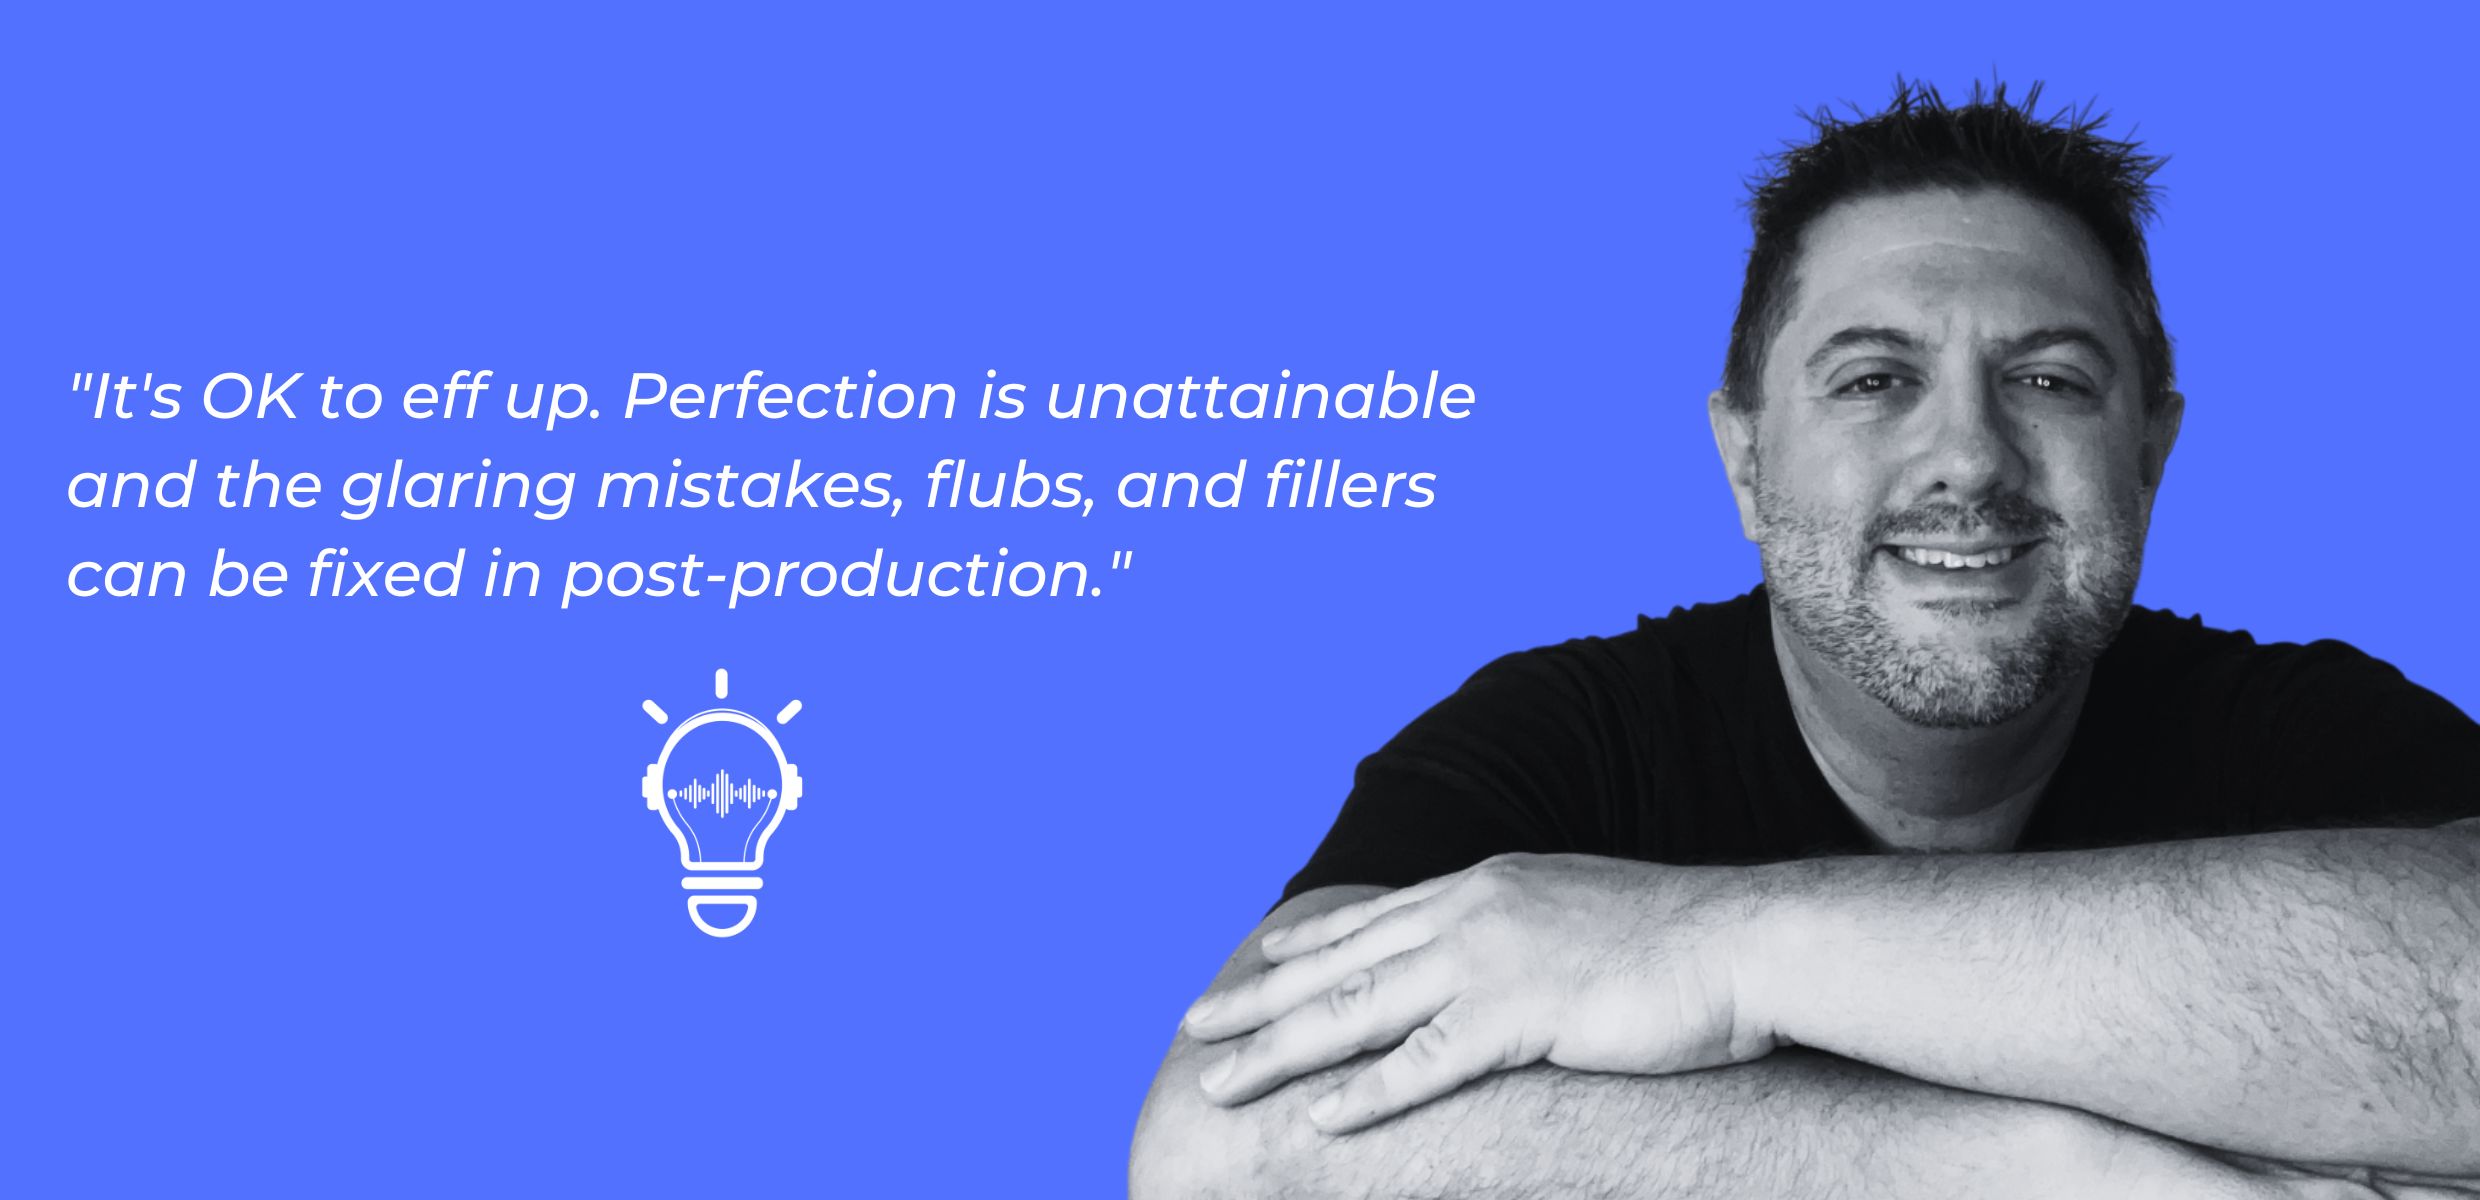 When it comes to creating better solo podcast recordings, making a mistake or two will happen. Don't let it derail your efforts! Take time to collect your thoughts and fix any unwanted mistakes in post-production.